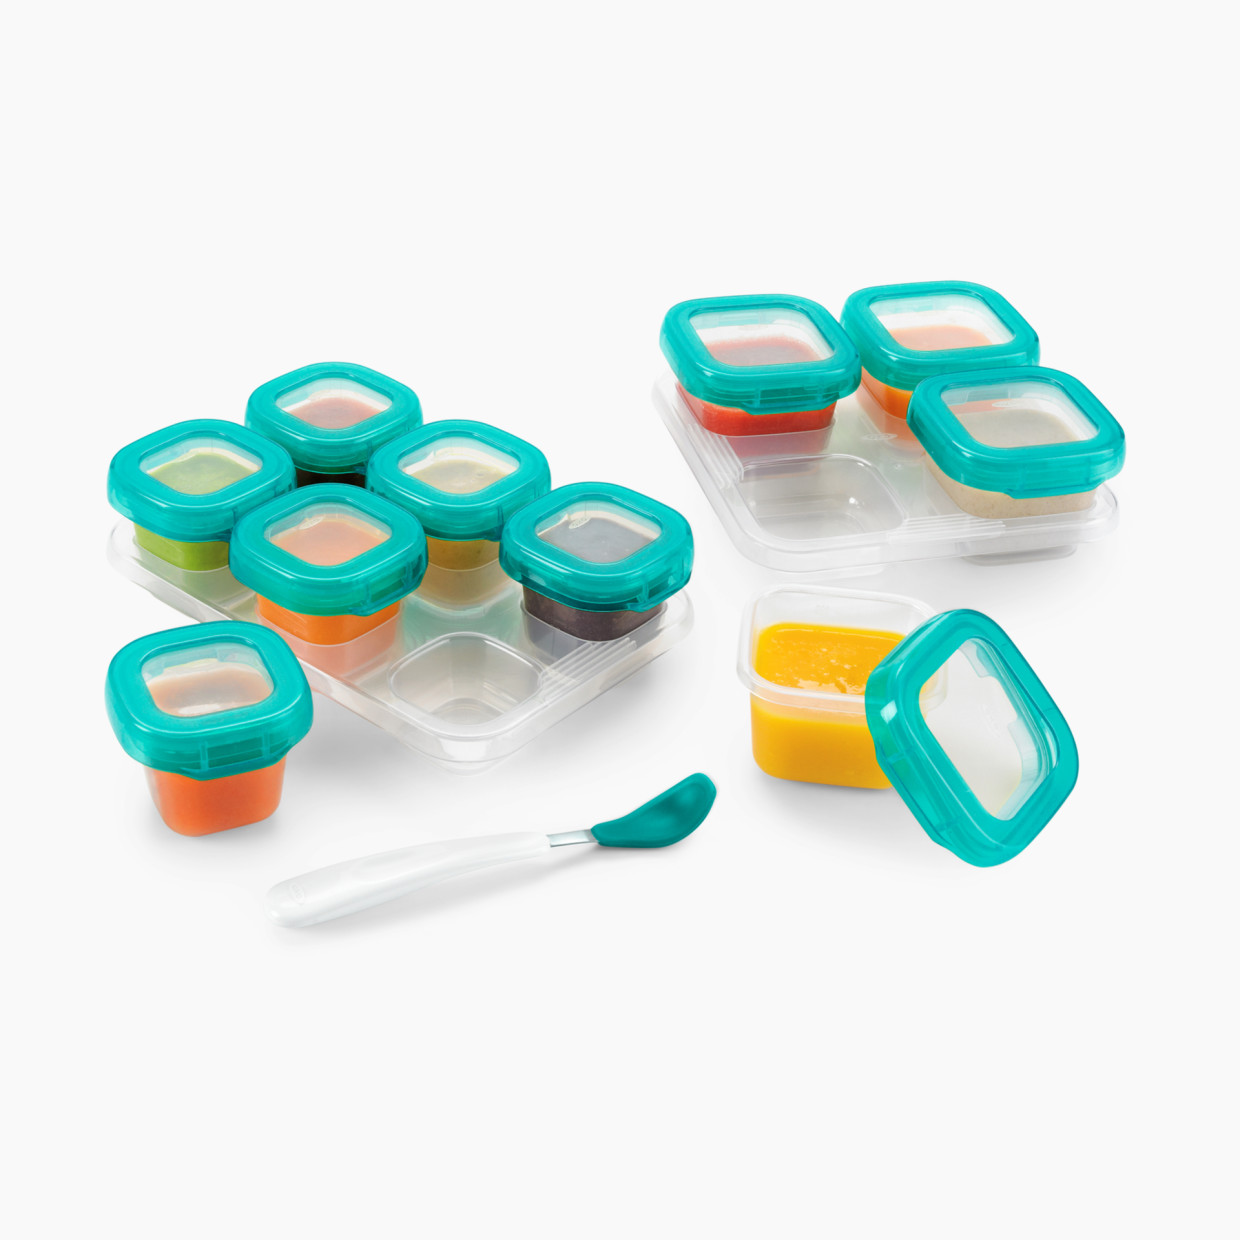 Oxo Tot Silicone Toddler Dinner Plate Teal